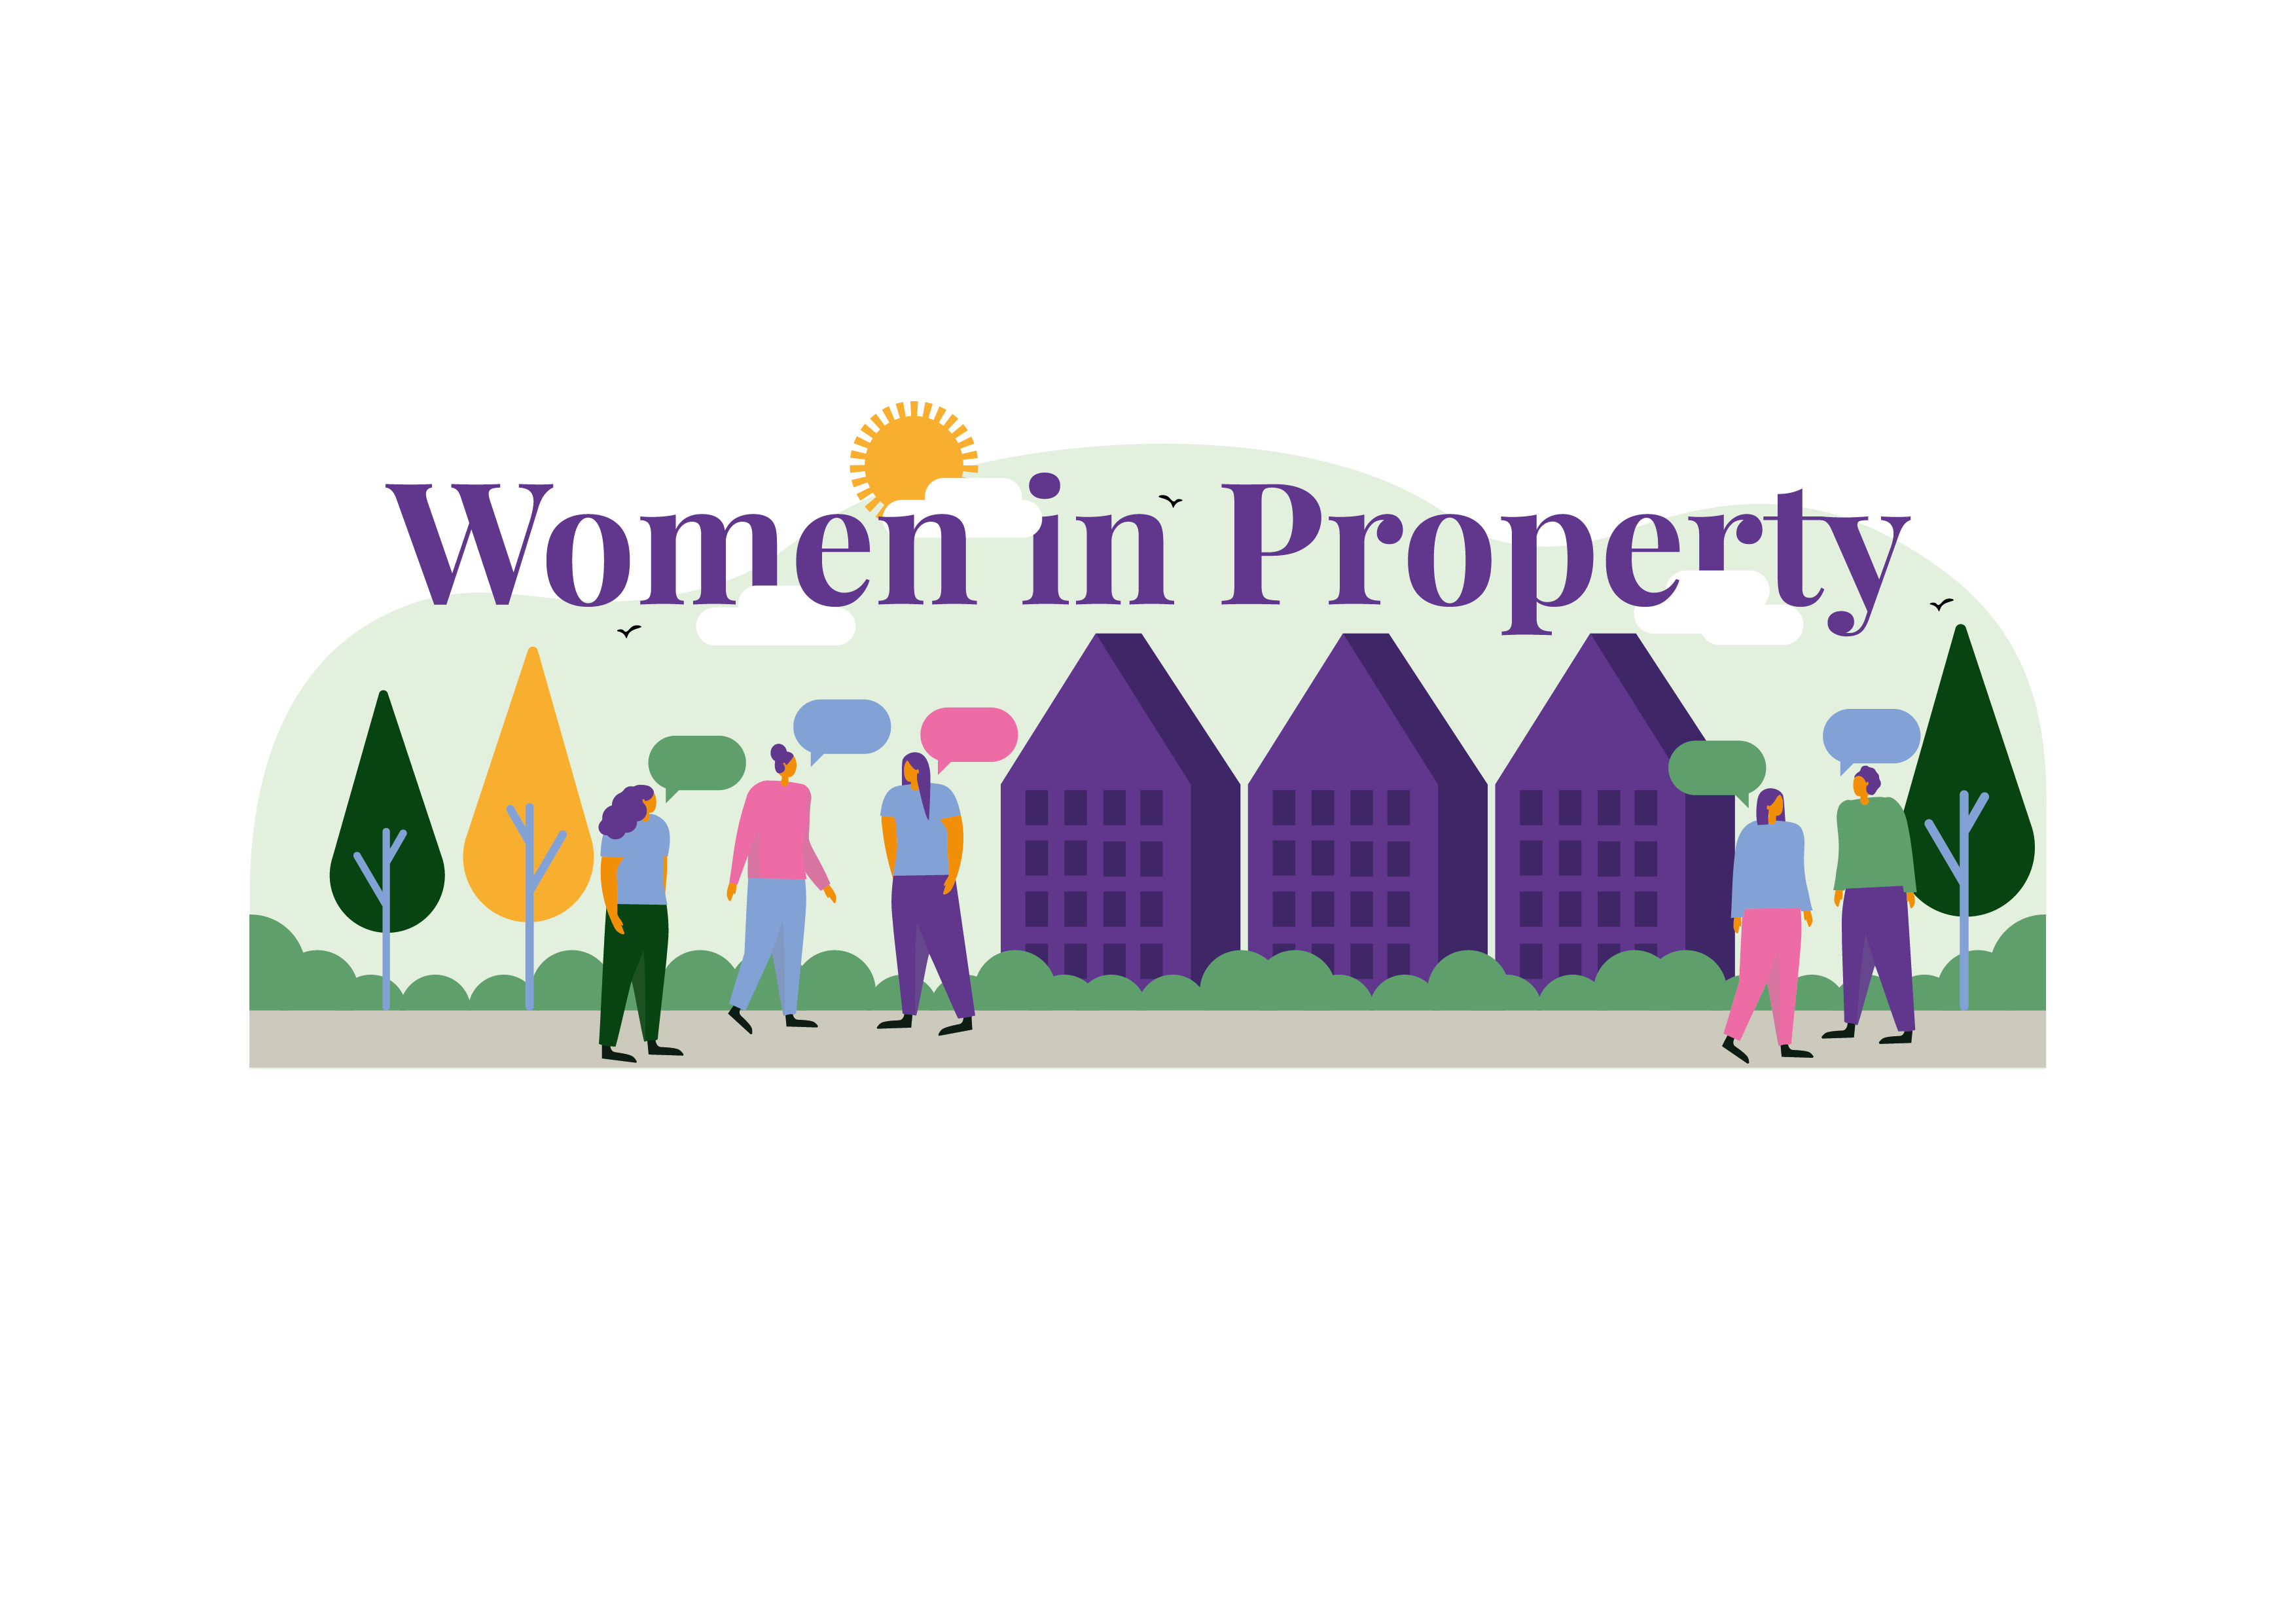 Catesby_WomenInProperty-01.png